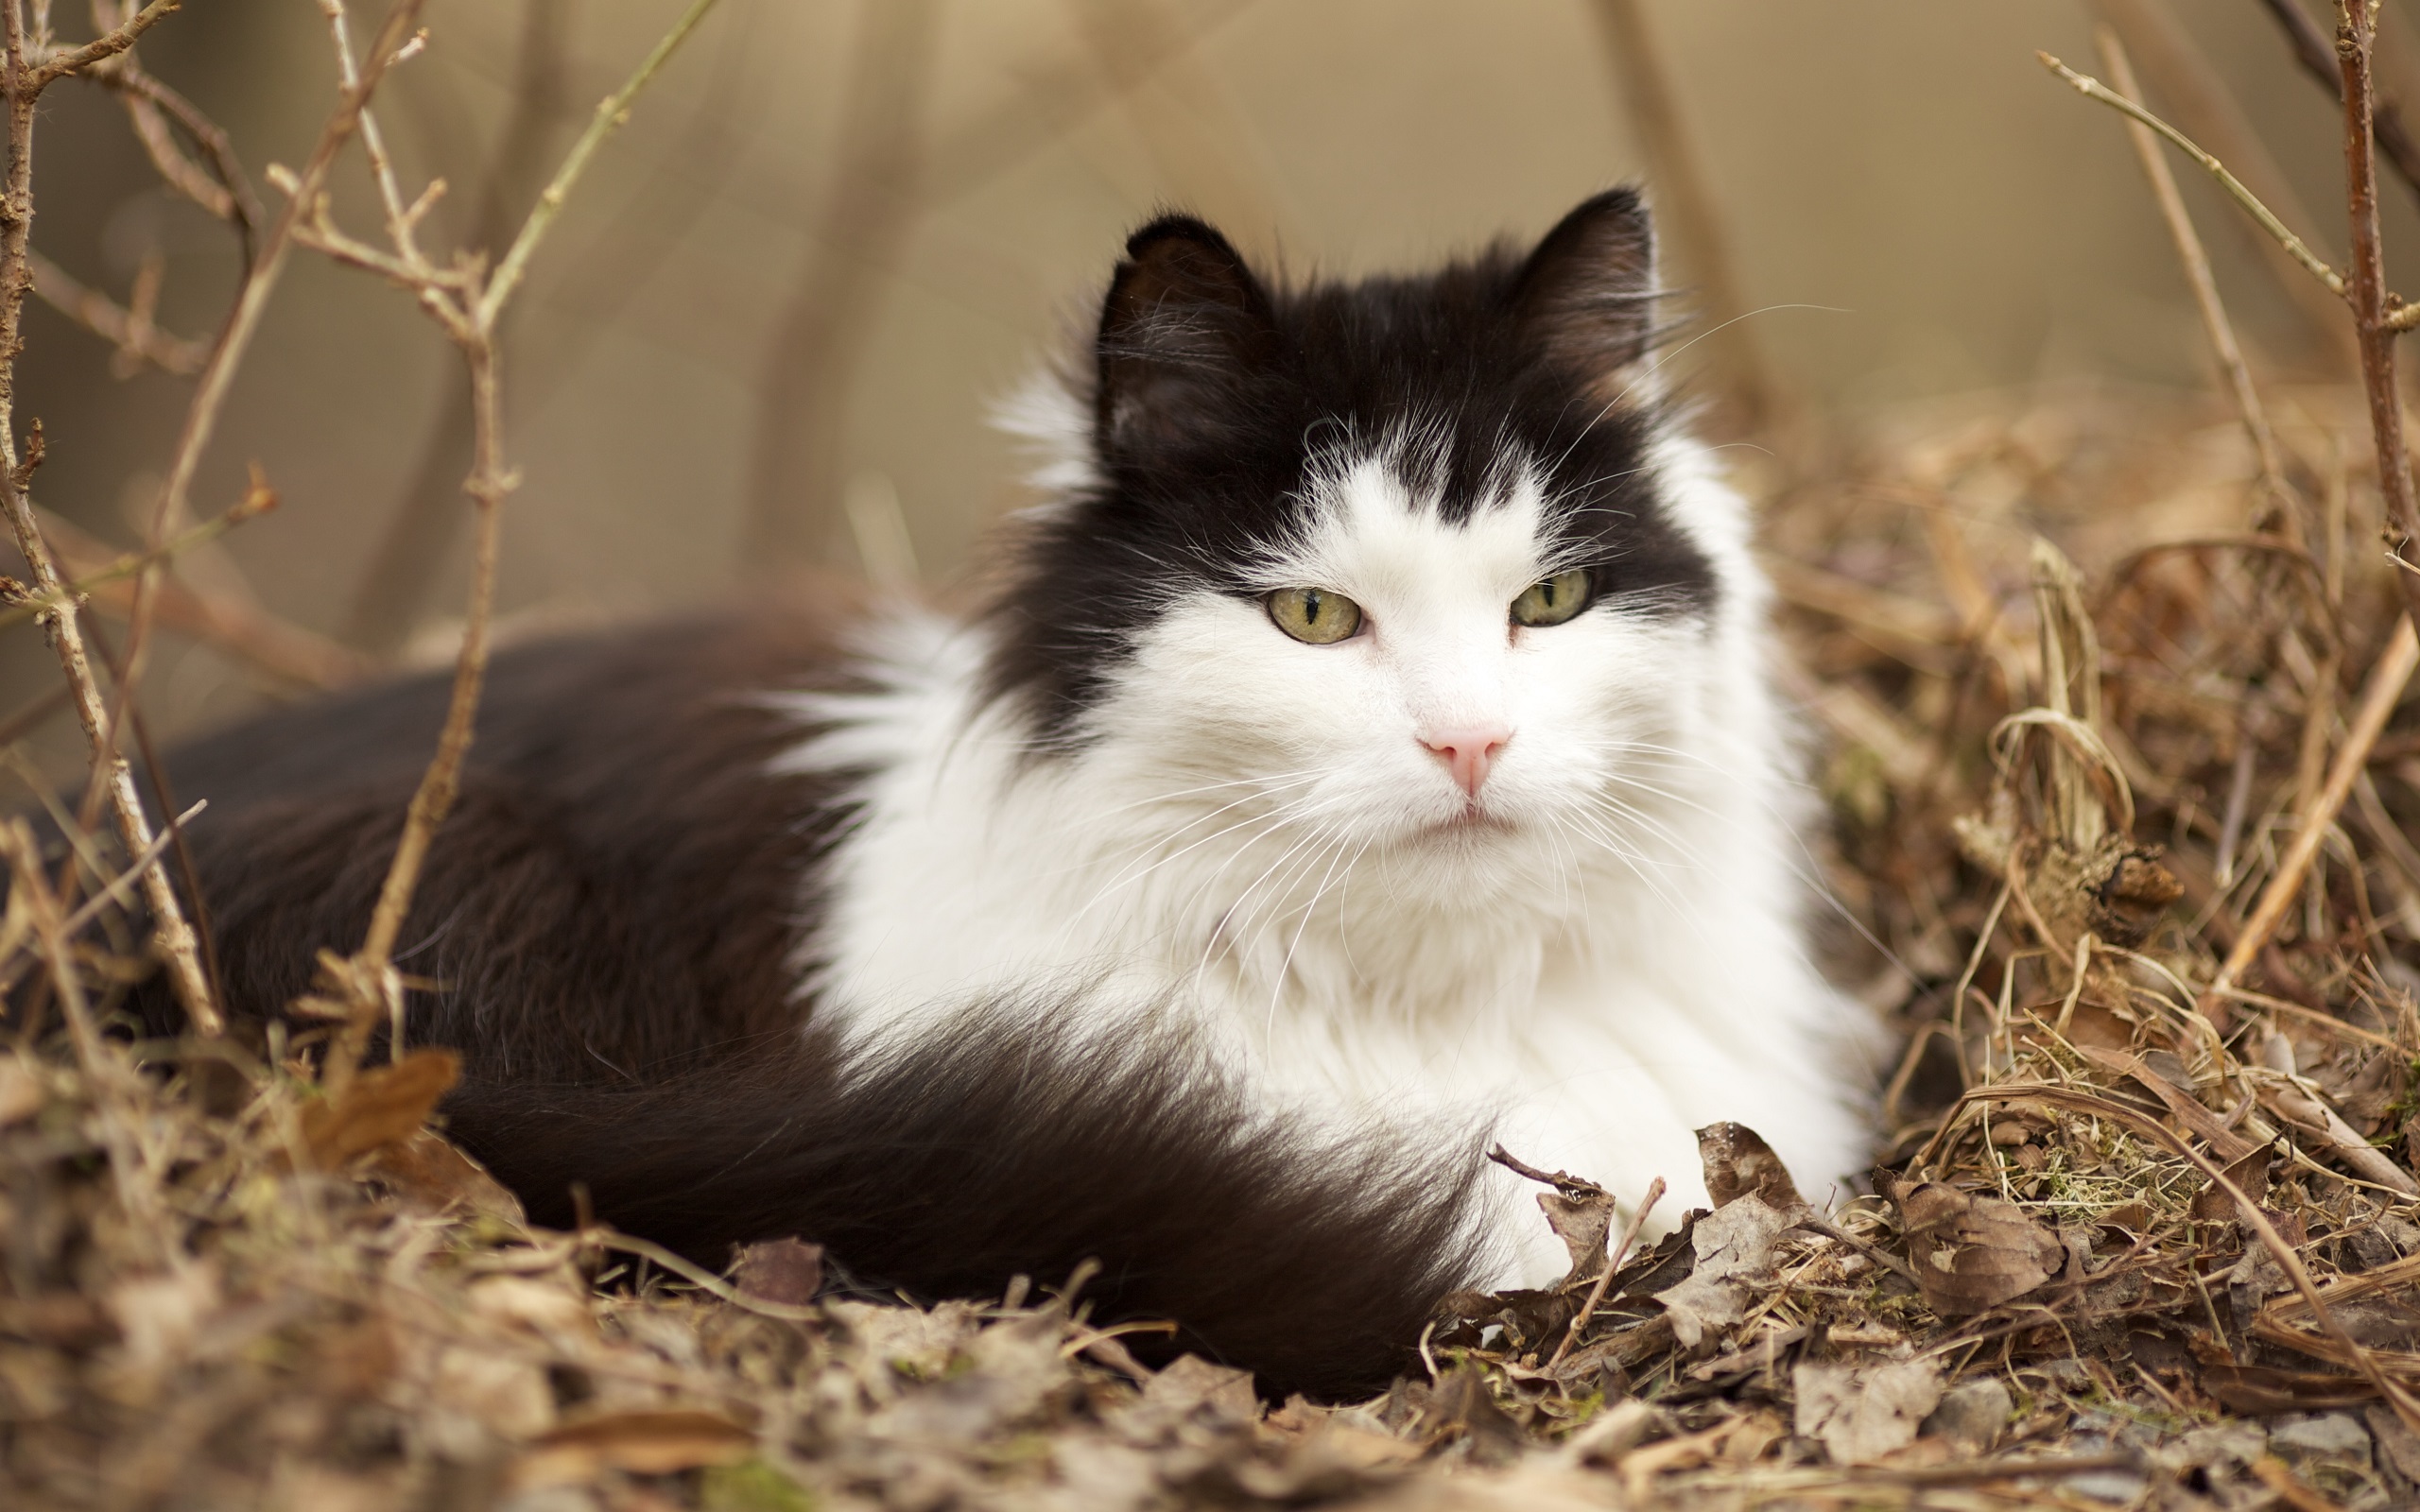 General 2560x1600 cats animals nature depth of field